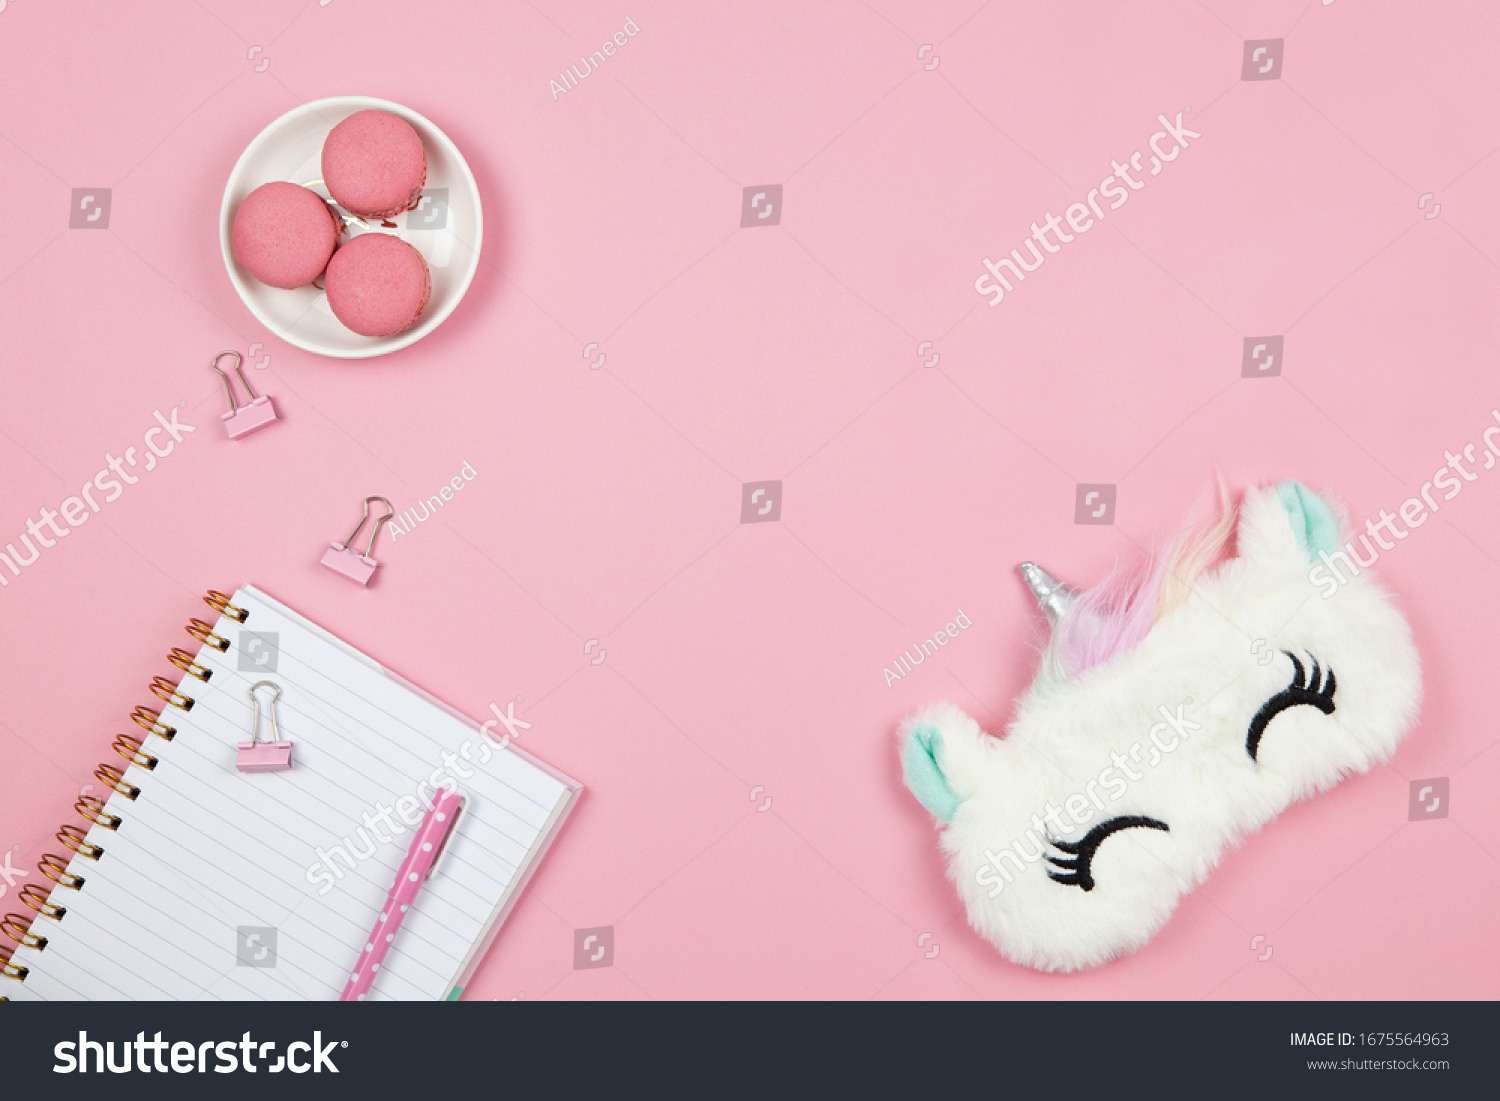 Modern female working space, top view. Cute women's or girls things, slleep mask, macarons, notepad, pen, clamps on pink backround, copy space, flat lay. Work from home concept. For blog. Horizontal. #1675564963